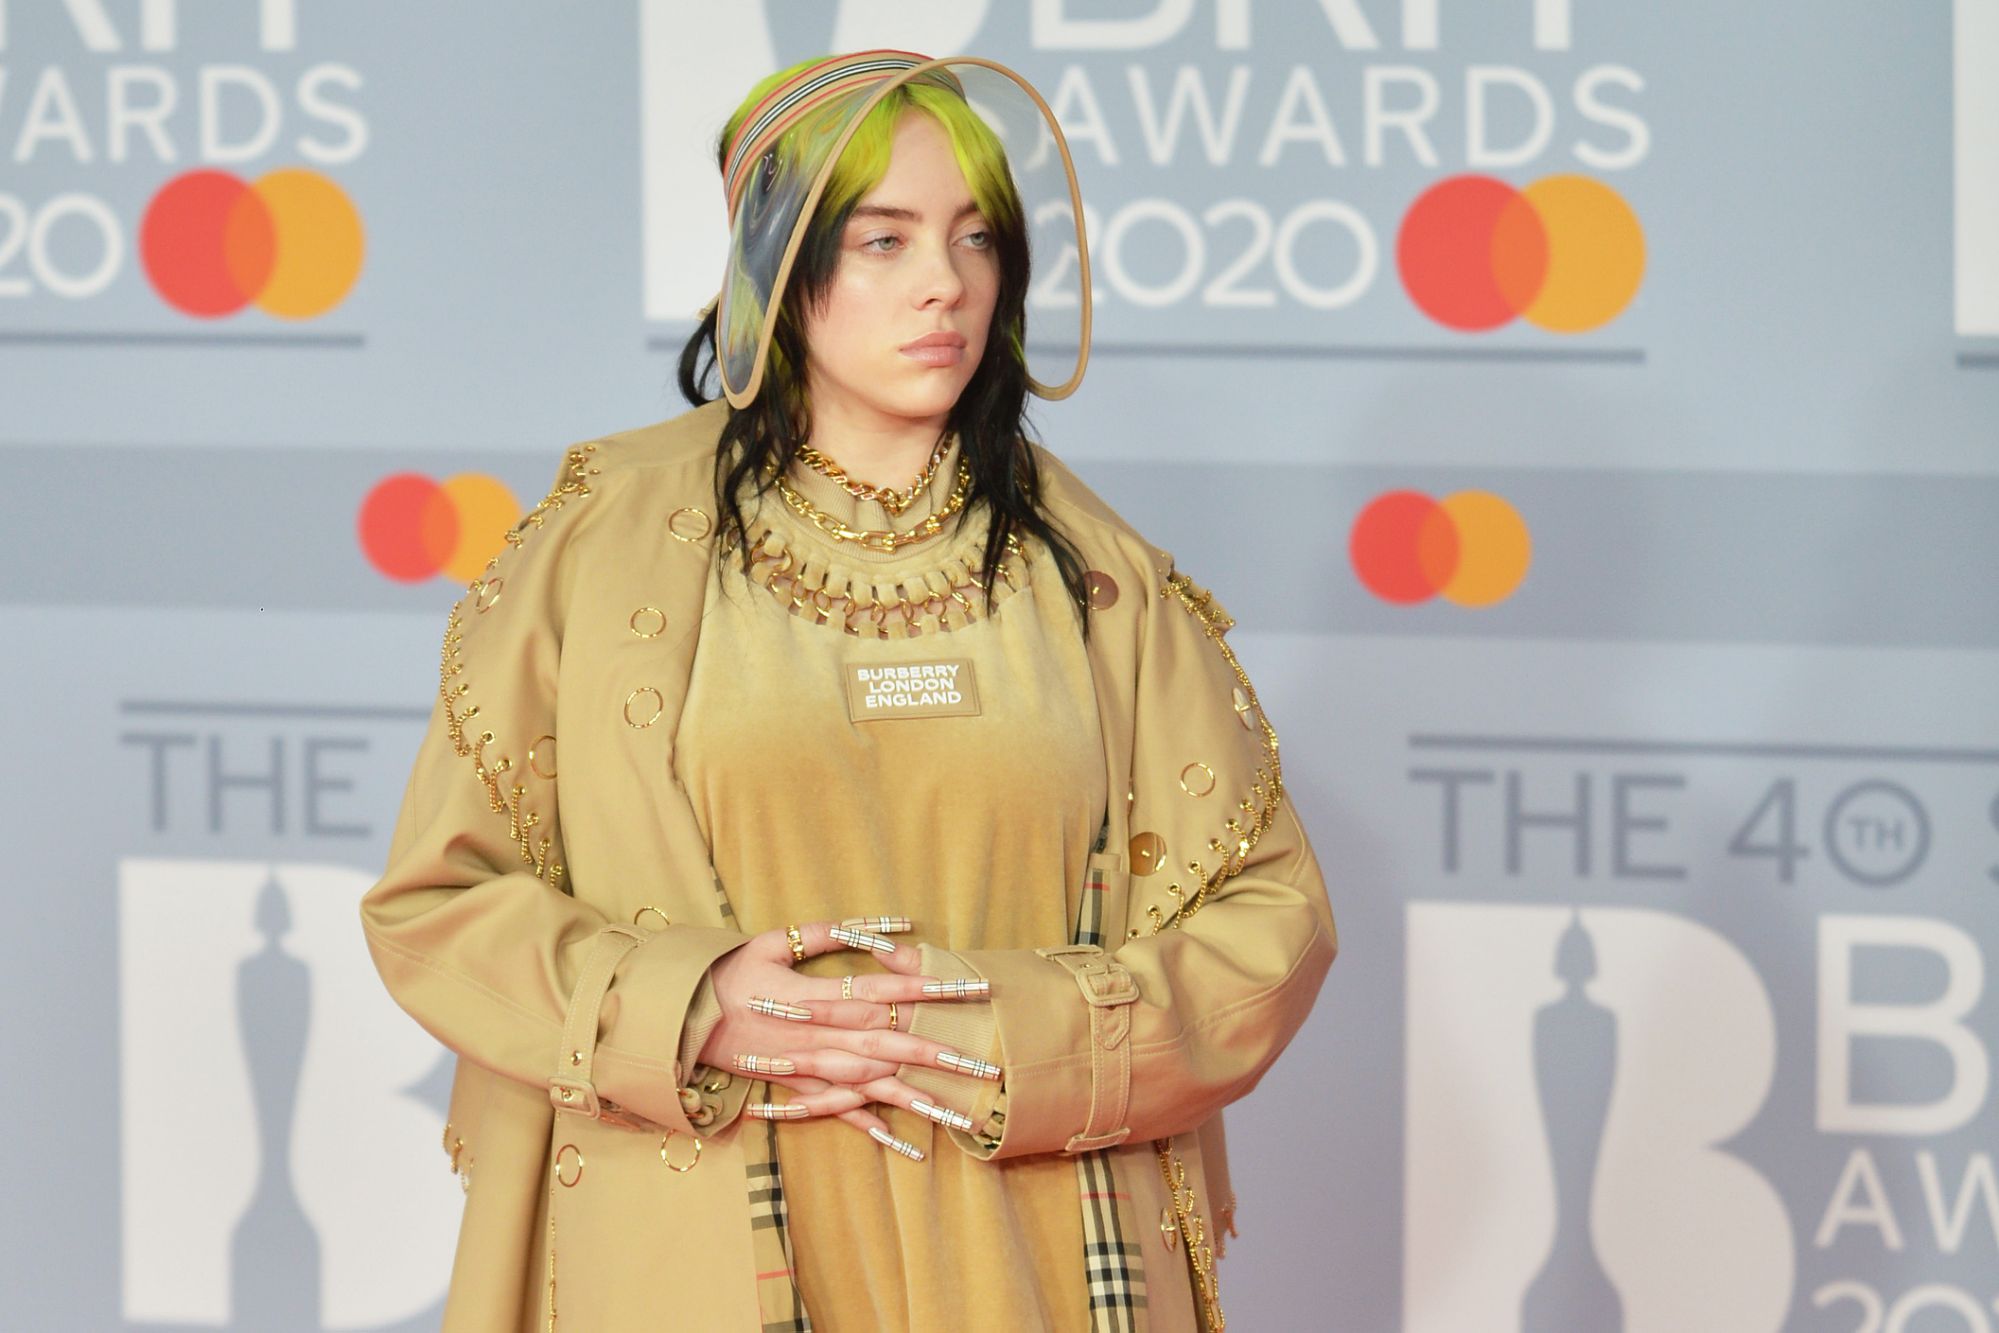 Billie Eilish, 19, opens her doors on body image issues